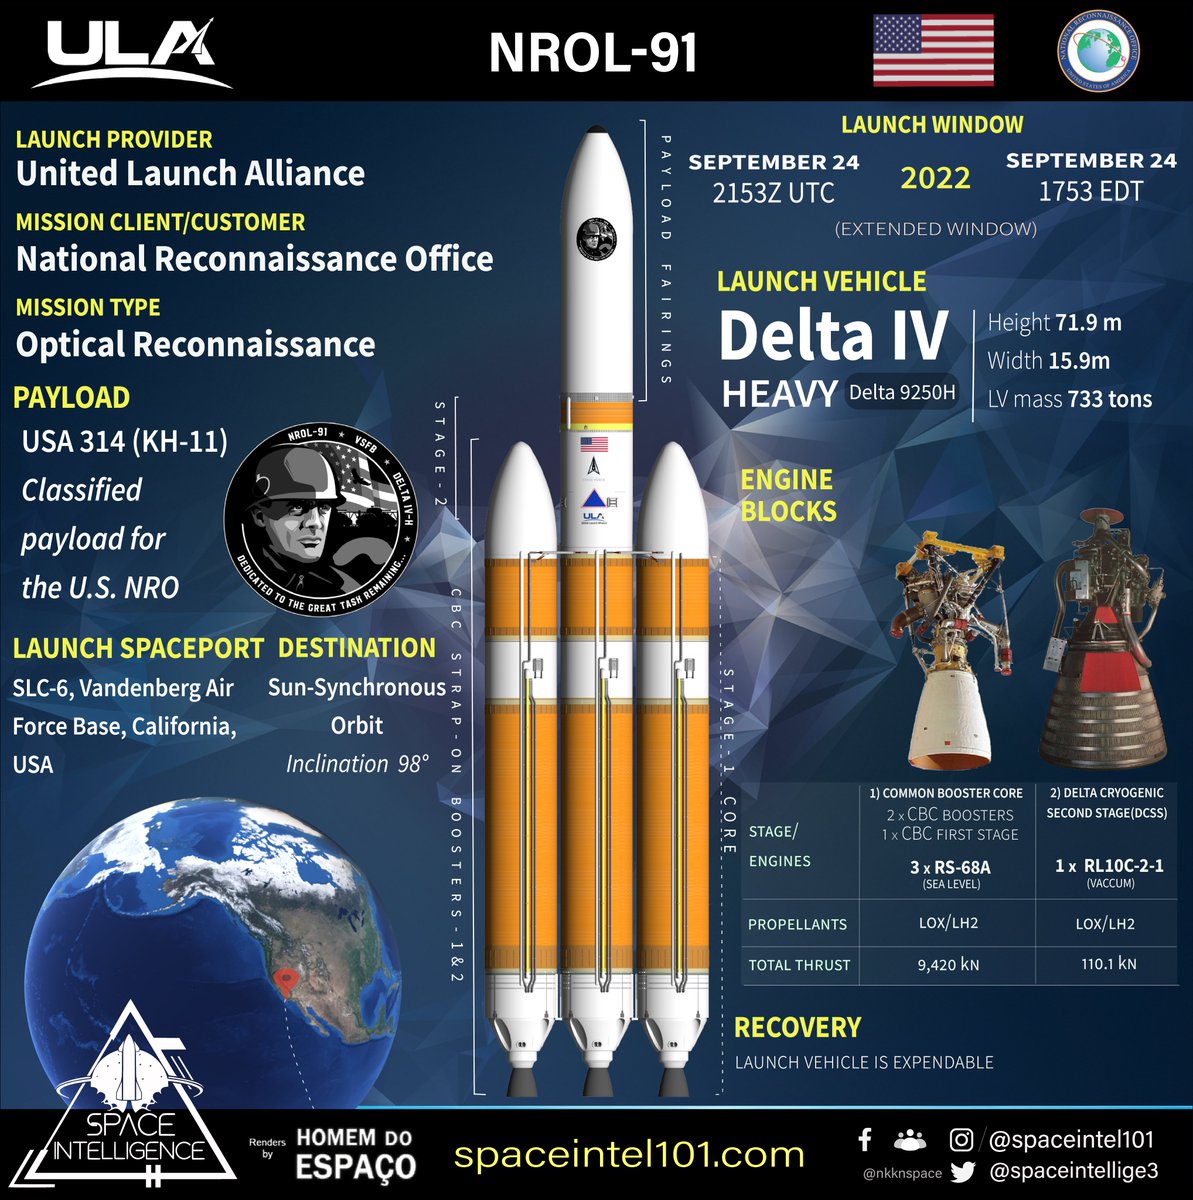 Orbital Launch no. 121 of 2022 🇺🇸🚀#56🇺🇸🛰️
United Launch Alliance to launch a classified #NROL91 payload for National Reconnaissance Office on top of #DeltaIVHeavy 🚀 rocket from Vandenberg Space Force Base 
P.s This will be the last launch of ∆H from the west coast.